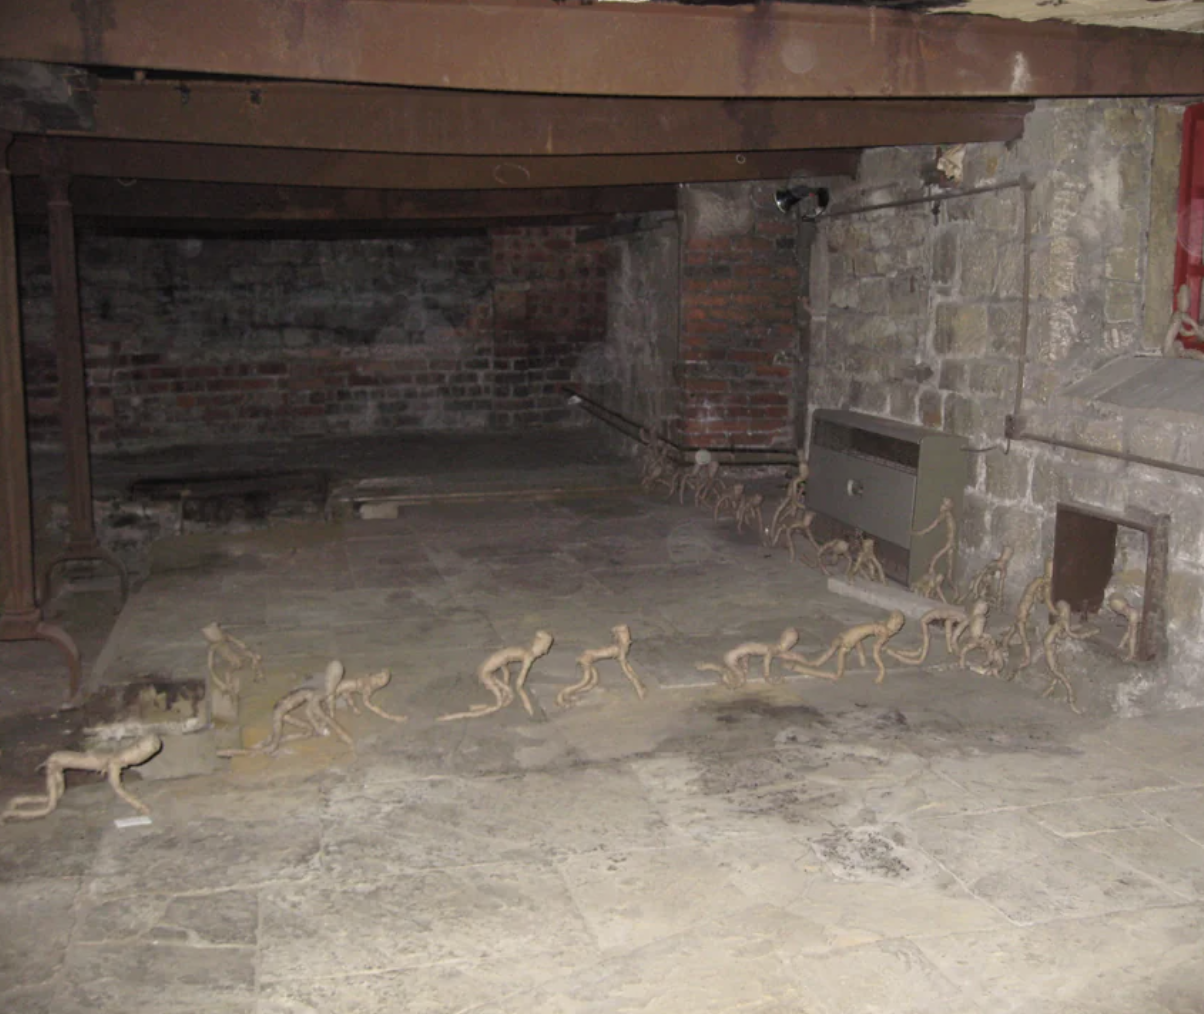 Exposed brick walls in a basement with small stick-figures in a row on the floor in various crouched positions